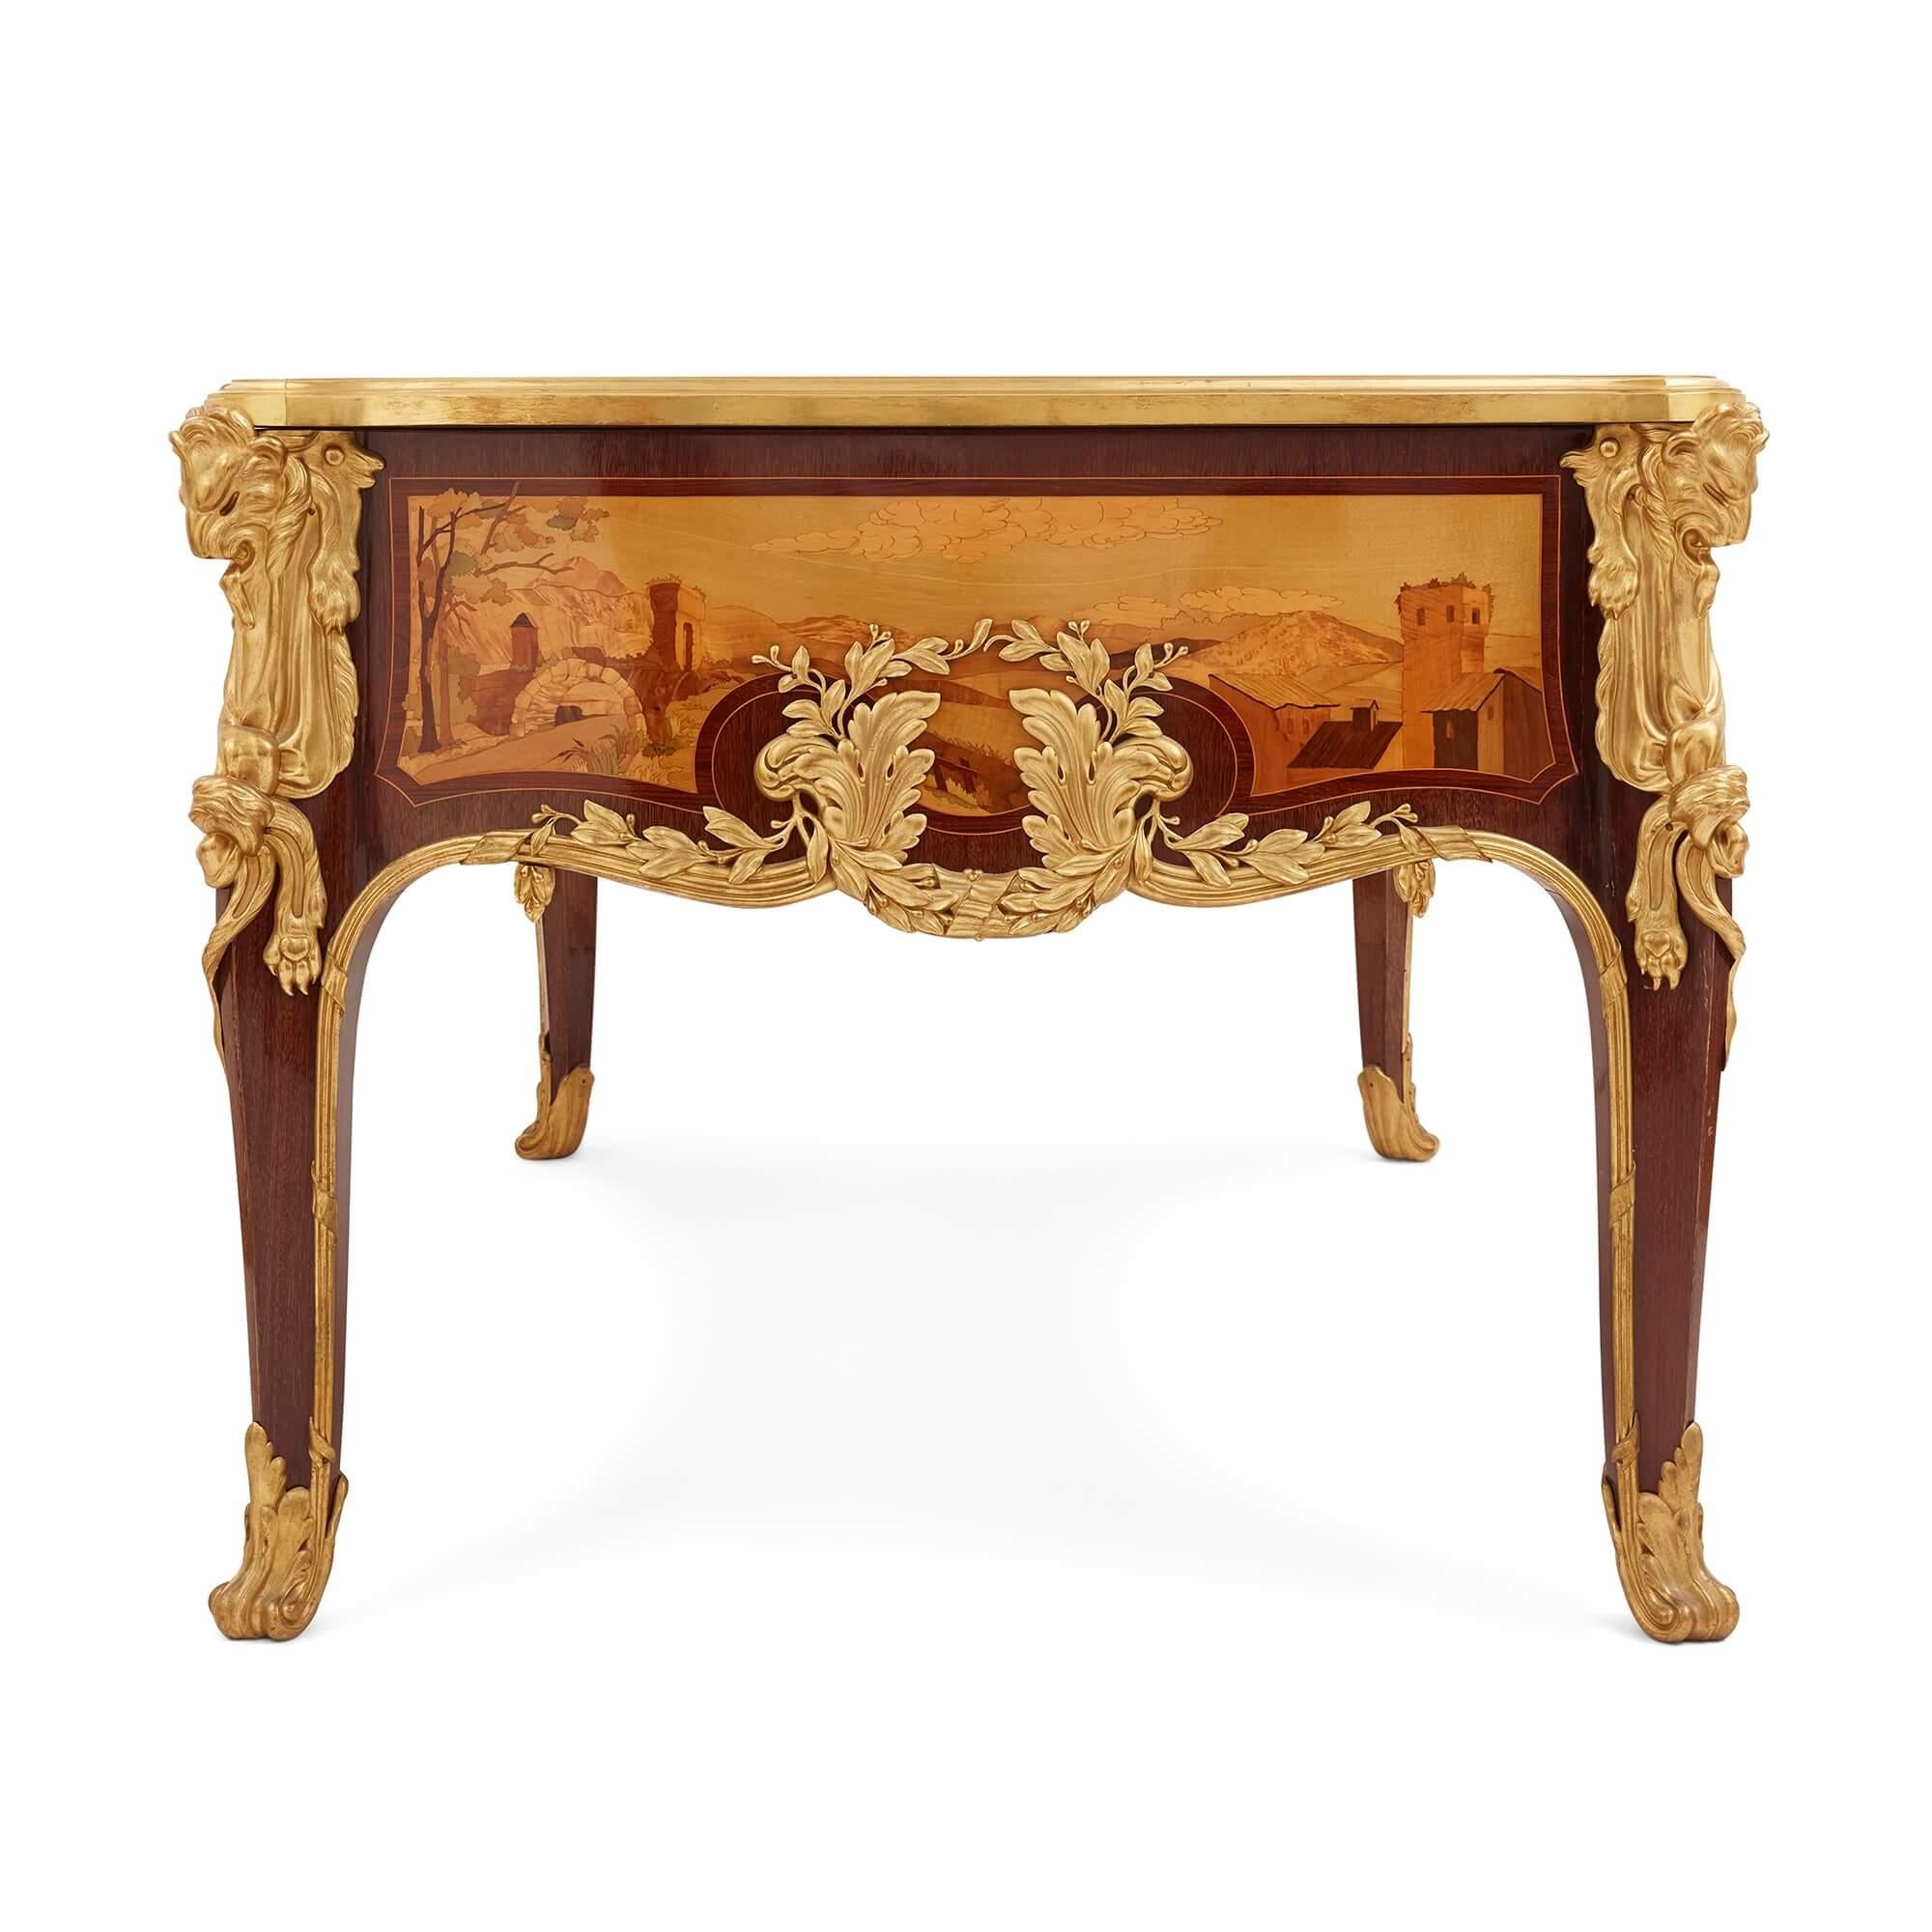 Antique French Louis XV Style Ormolu Mounted Marquetry Desk by Maison Léger In Good Condition For Sale In London, GB